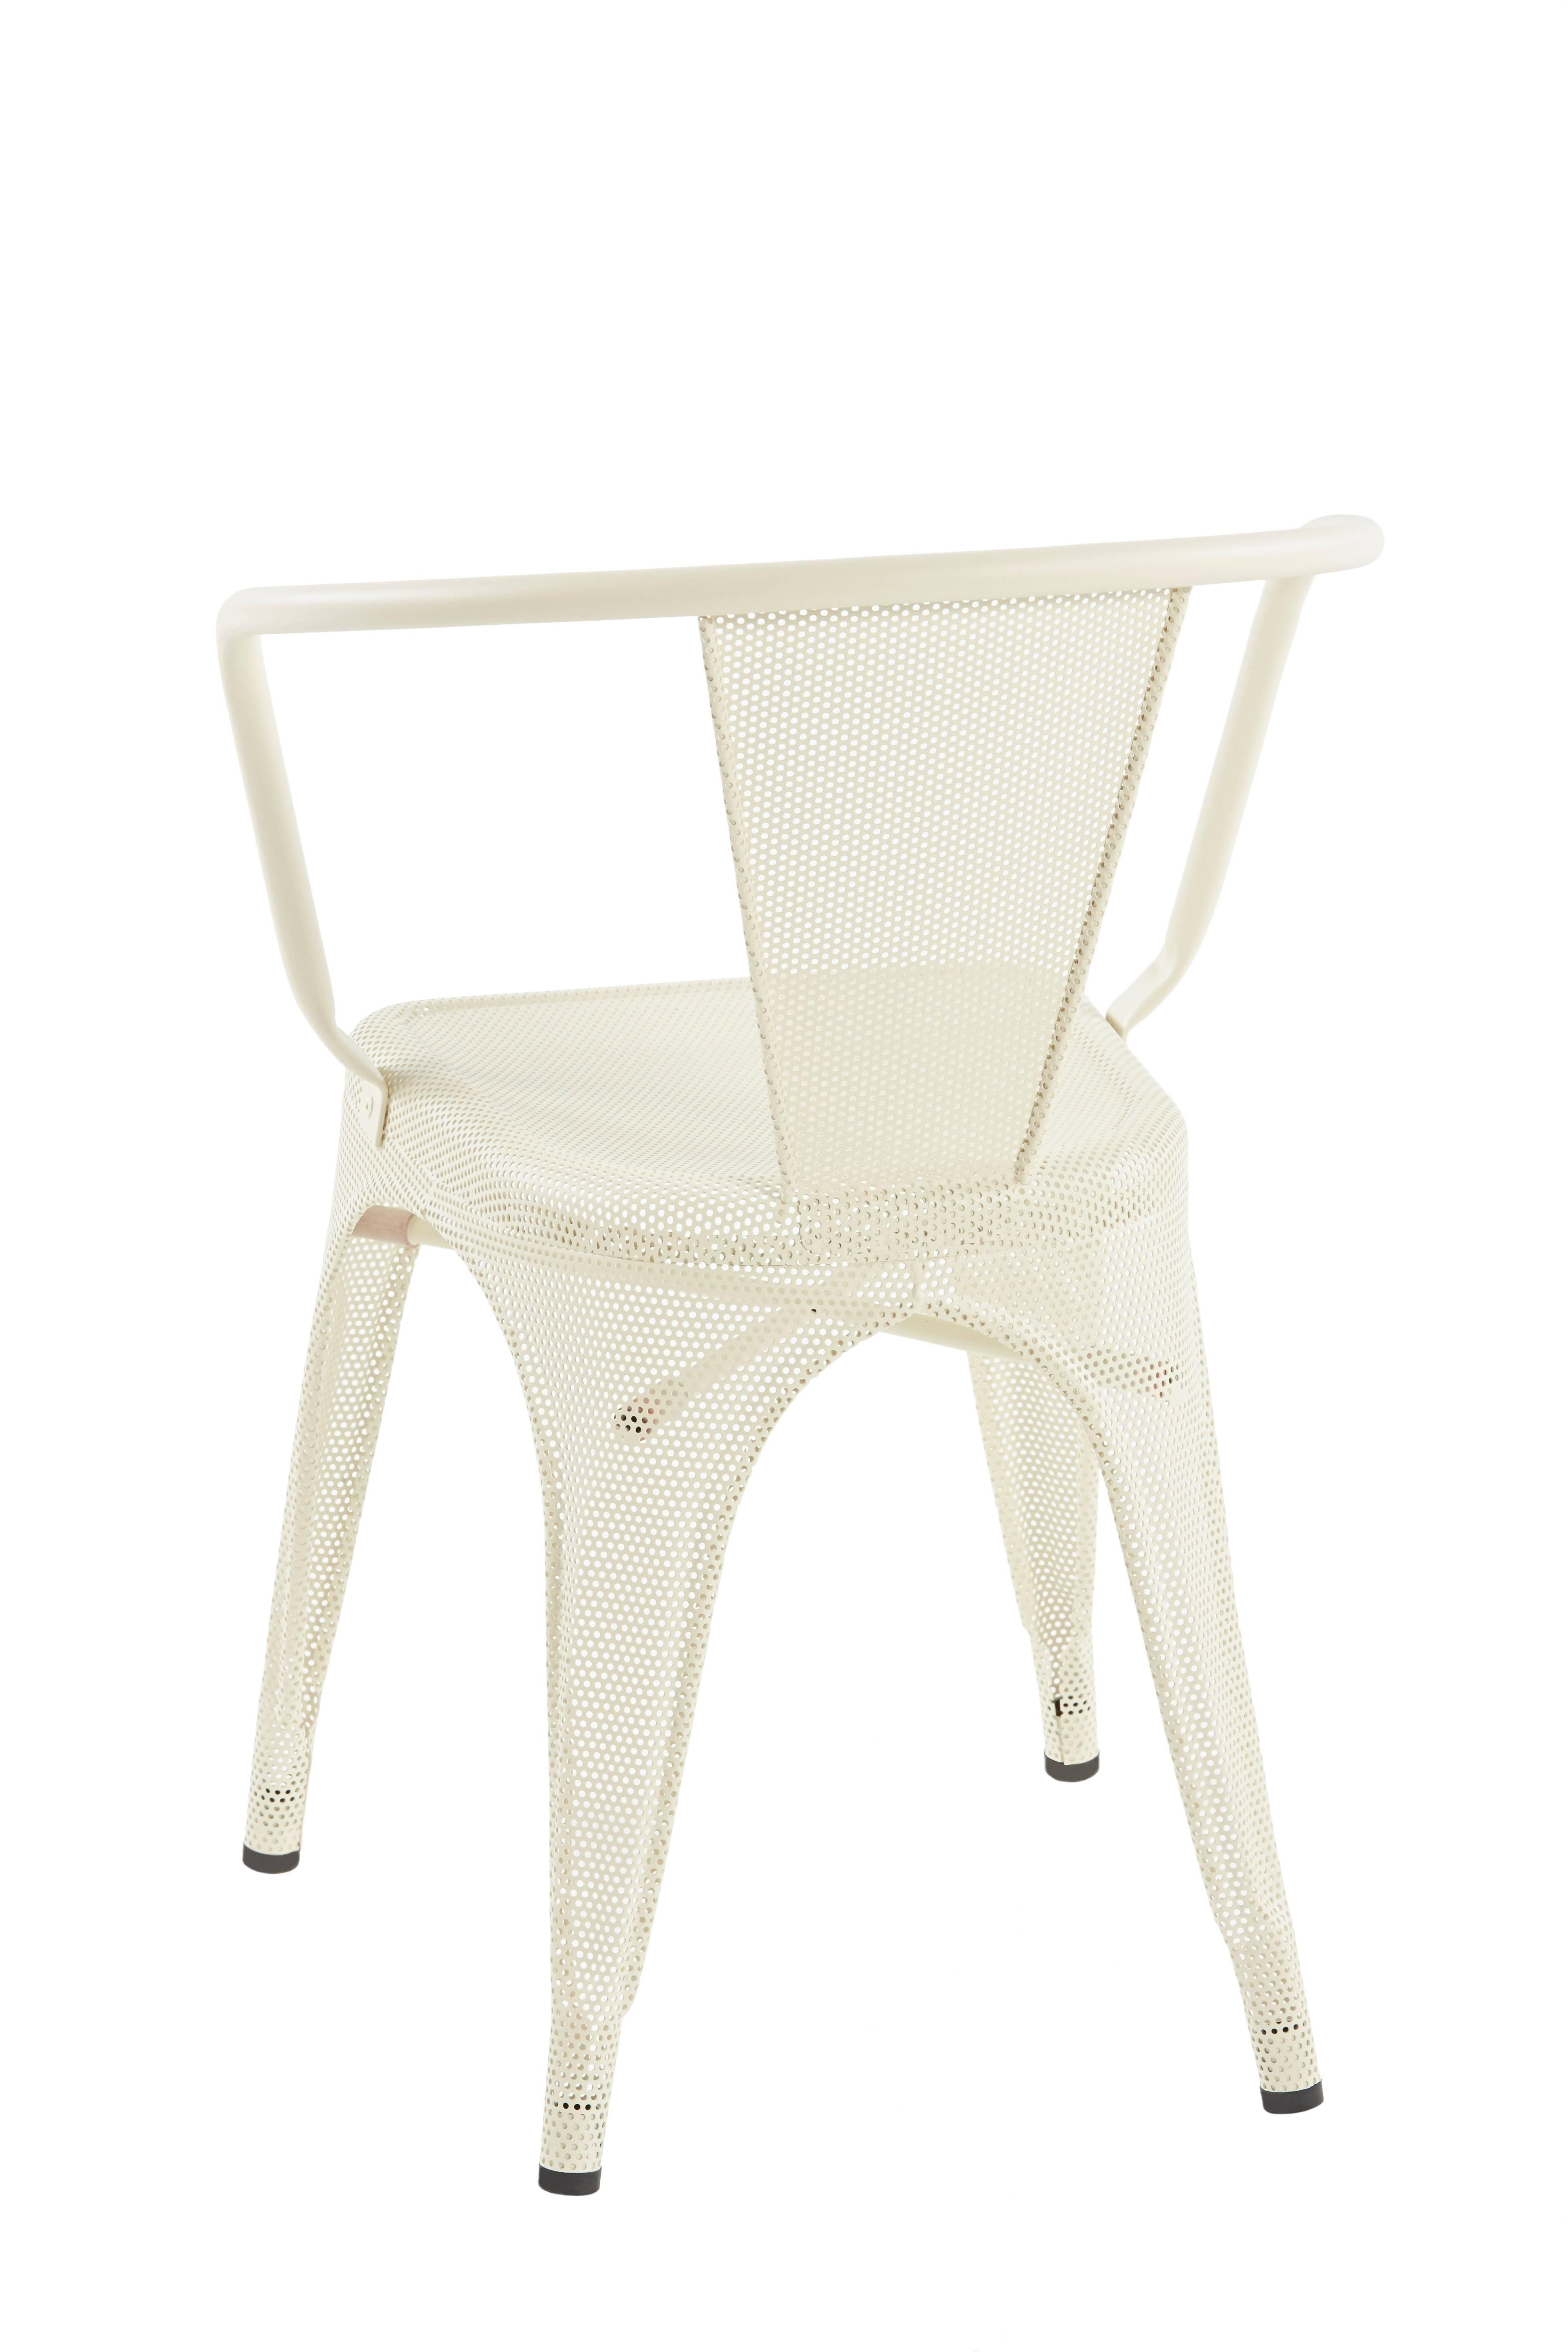 French A56 Armchair Perforated in Ivory by Jean Pauchard & Tolix